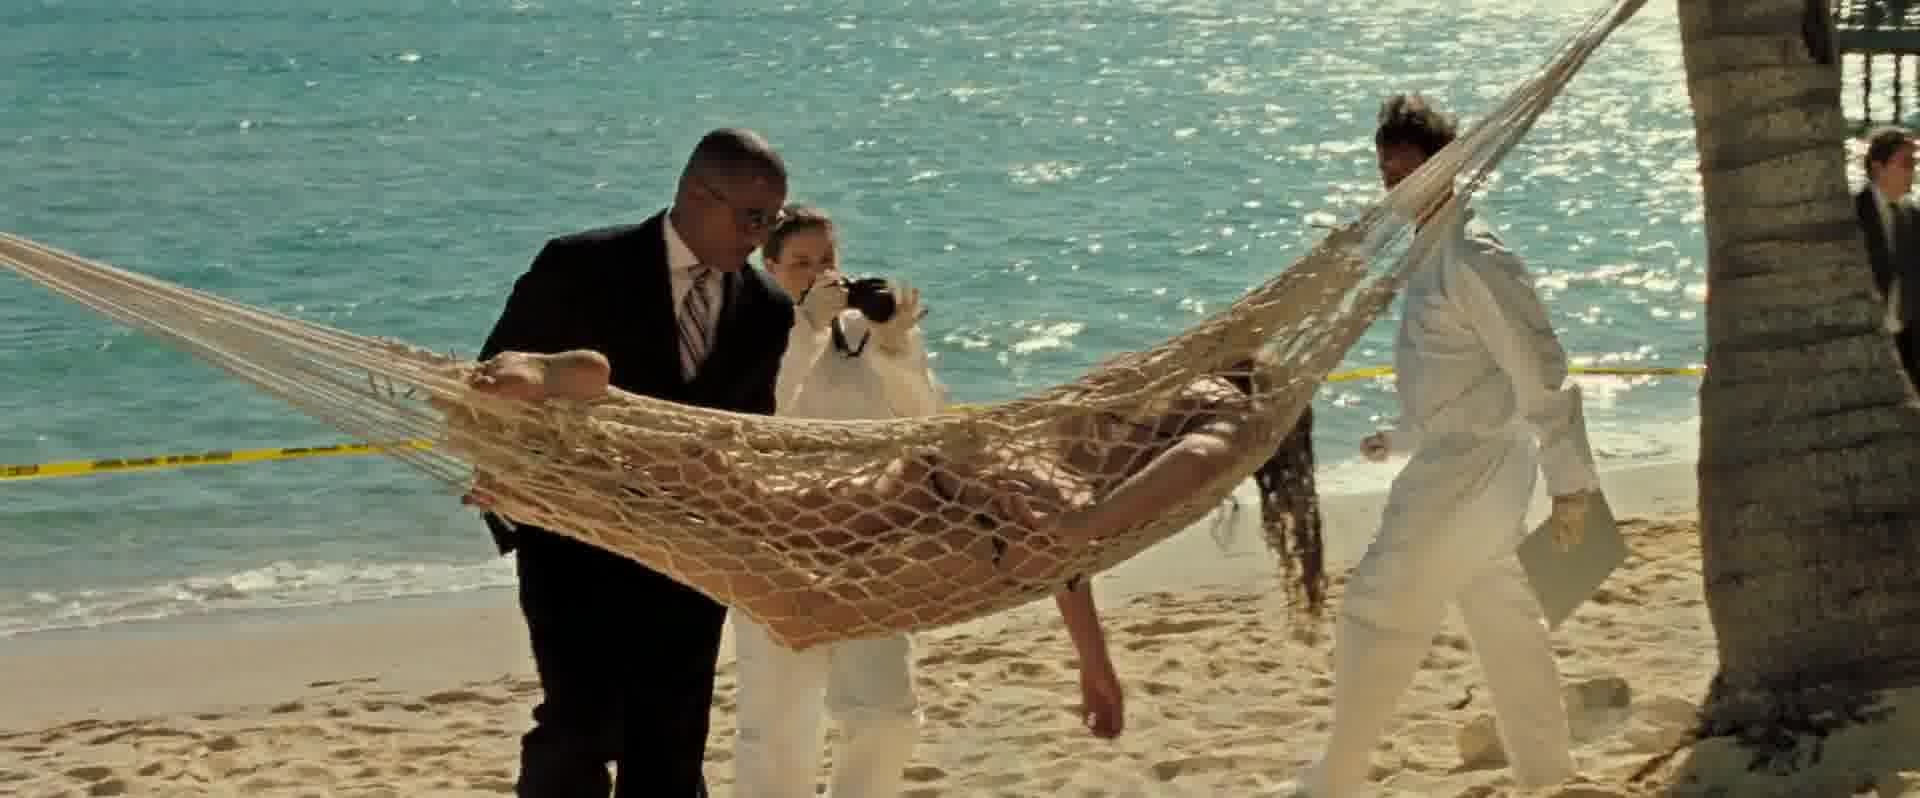 Caterina Murino As Solange in "Casino Royale"